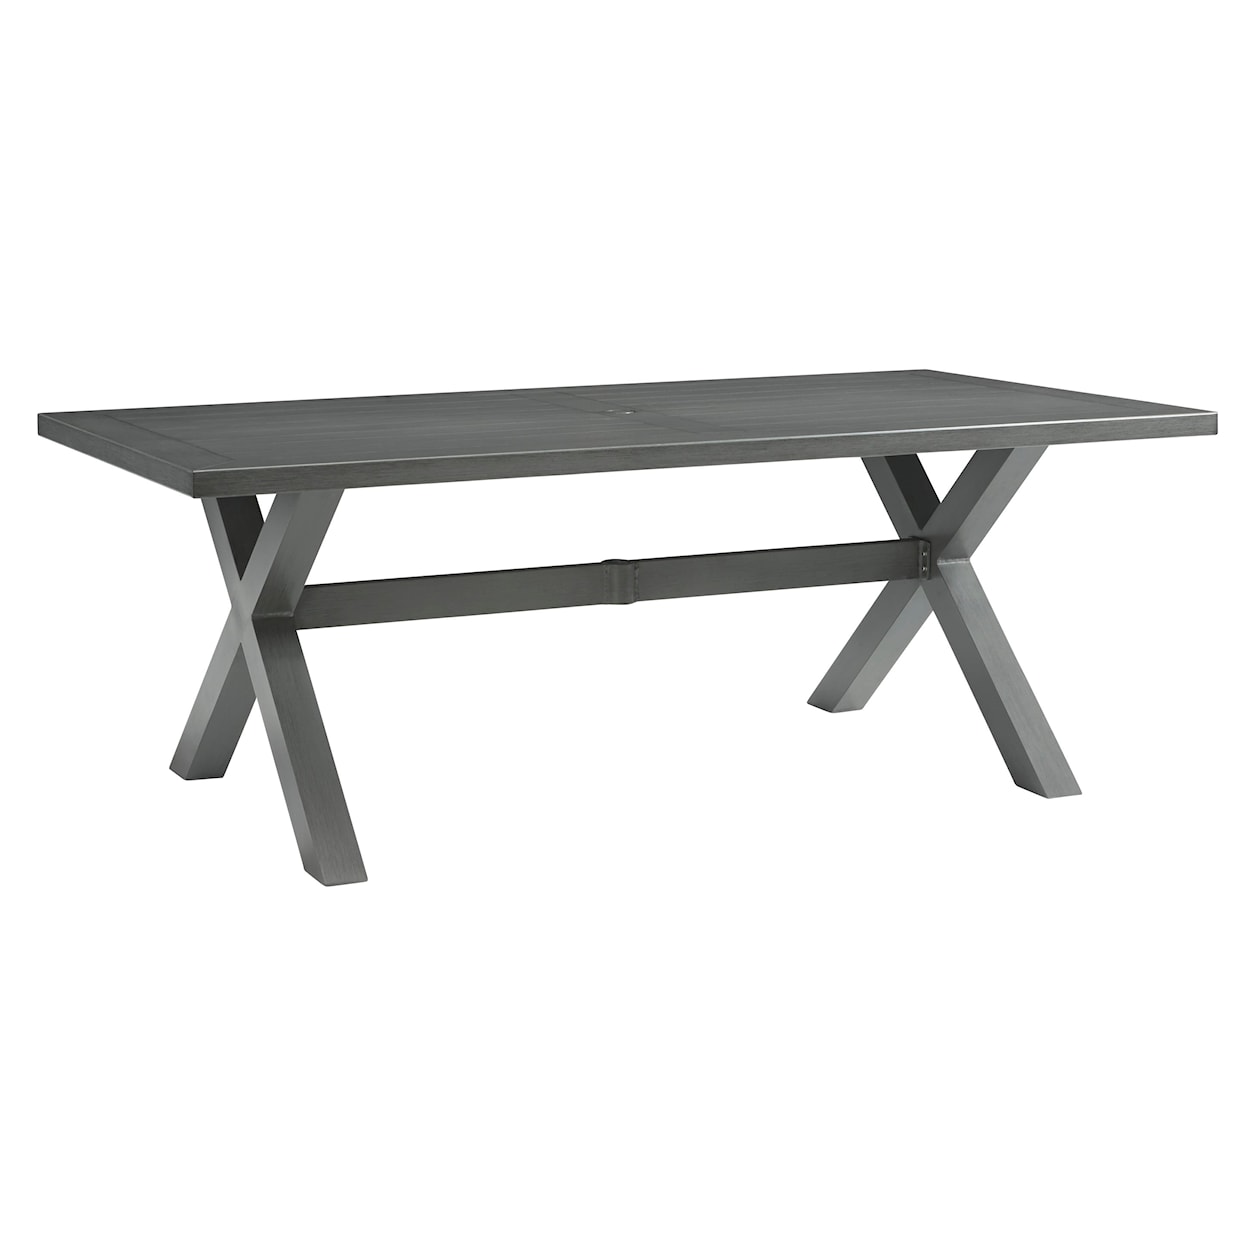 Benchcraft Elite Park Outdoor Dining Table